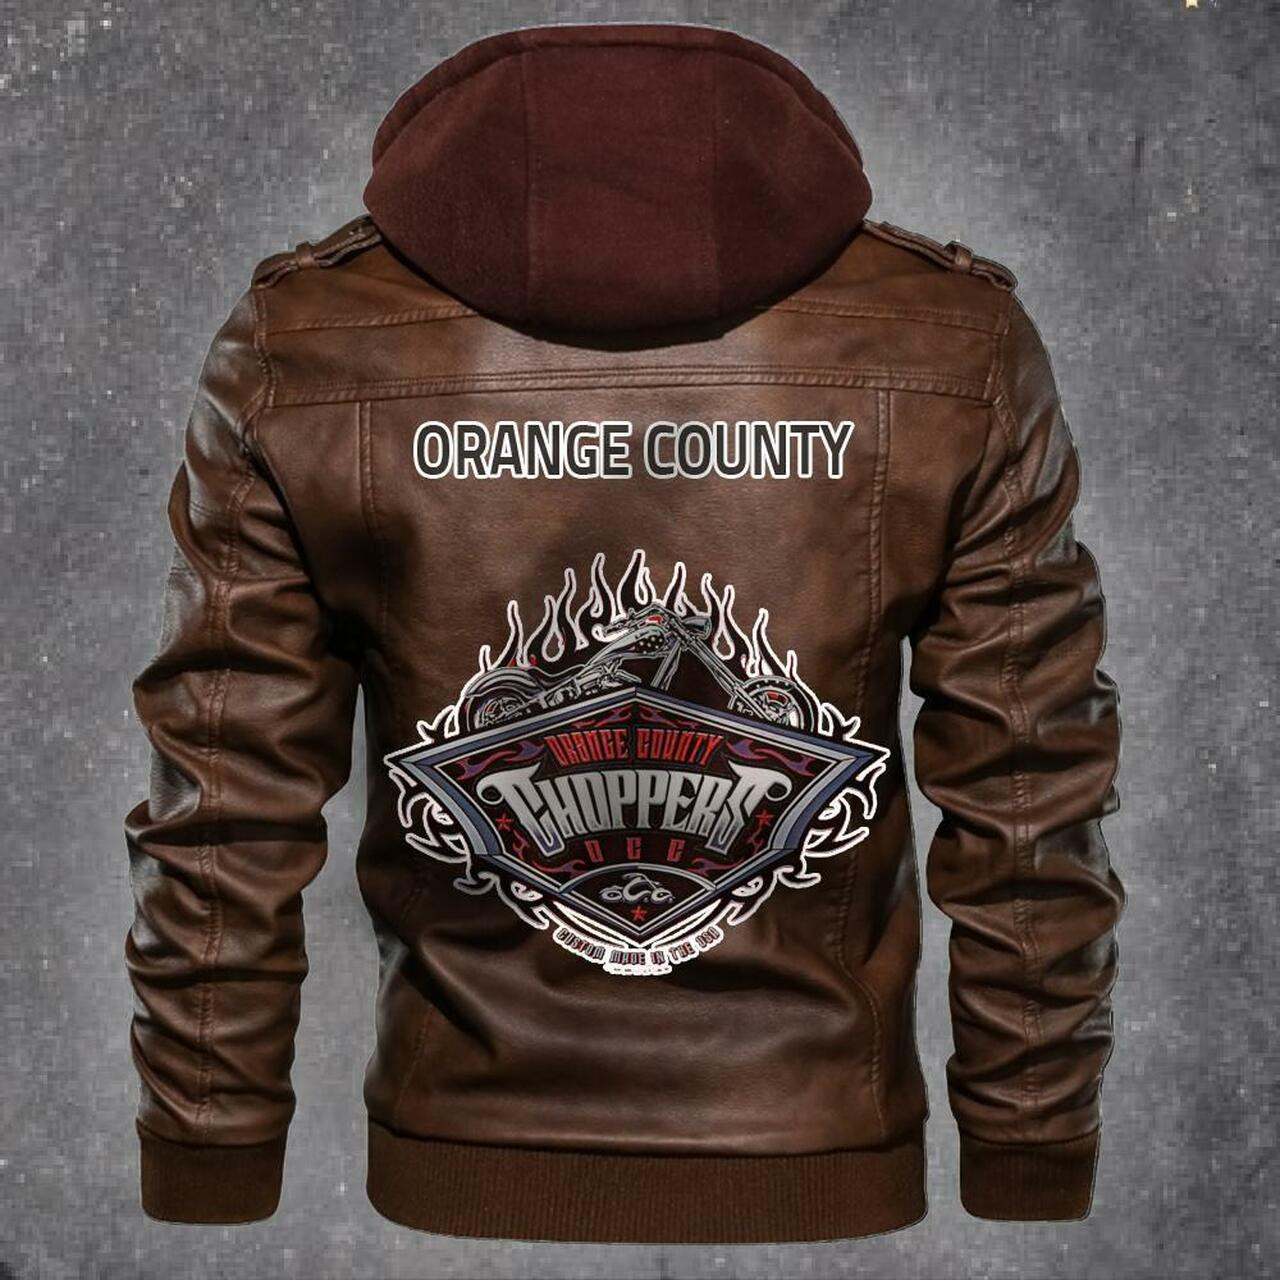 Check out and find the right leather jacket below 449